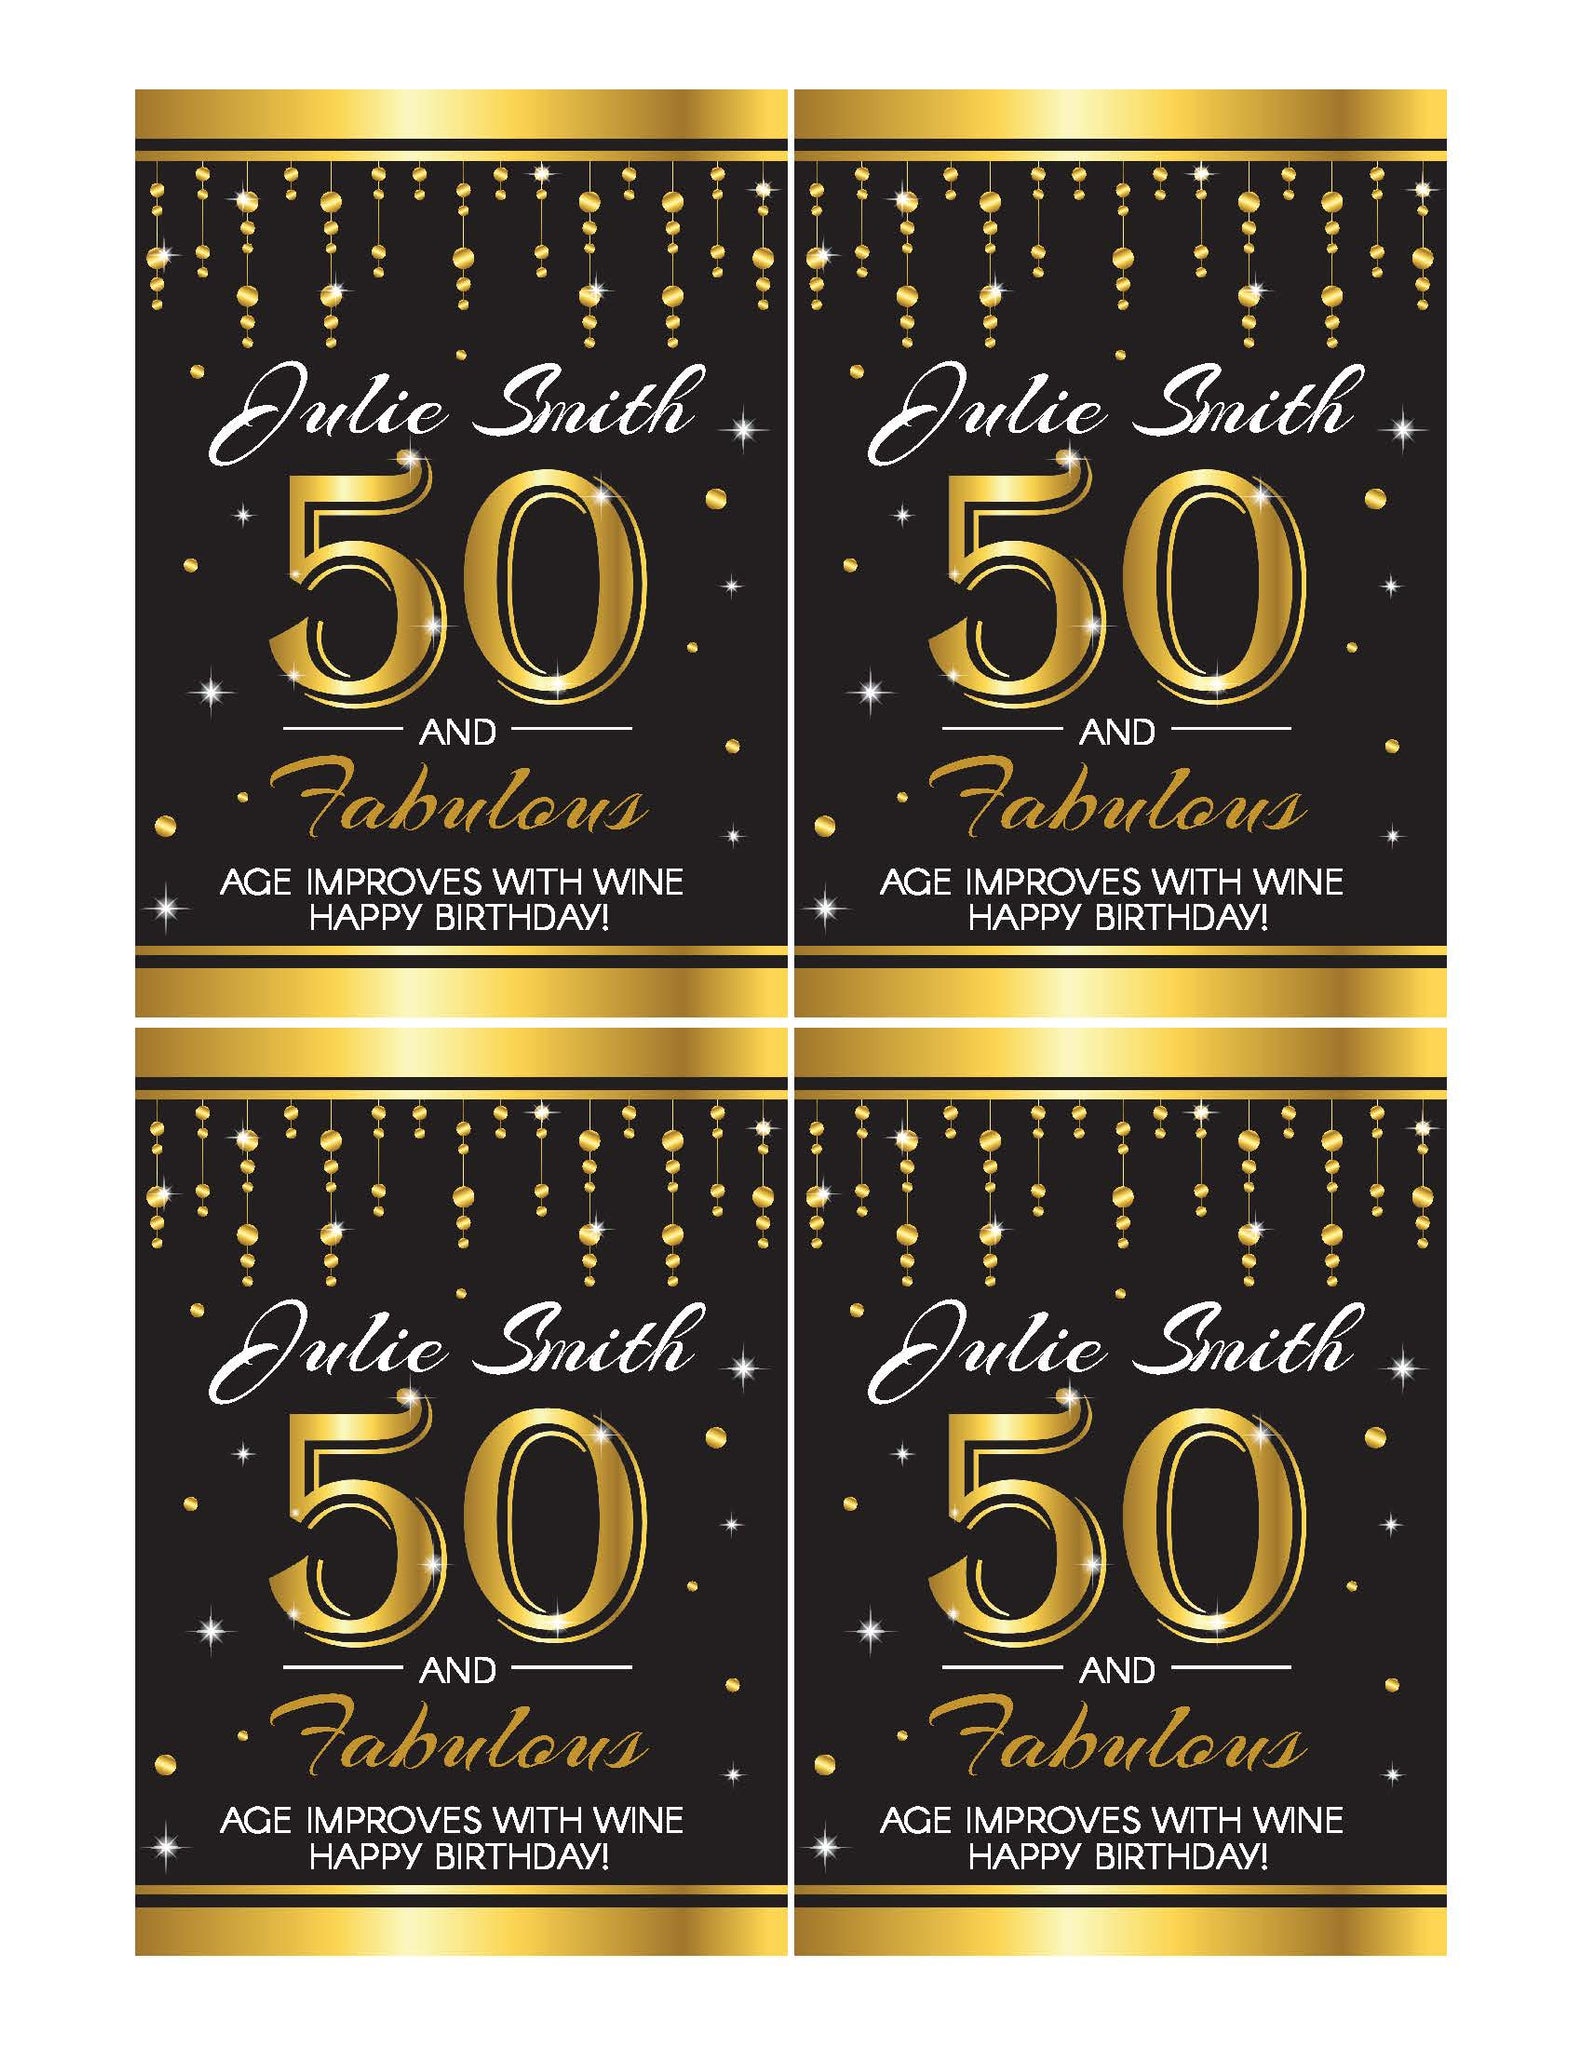 50th birthday wine labels uniquely designed easily personalized